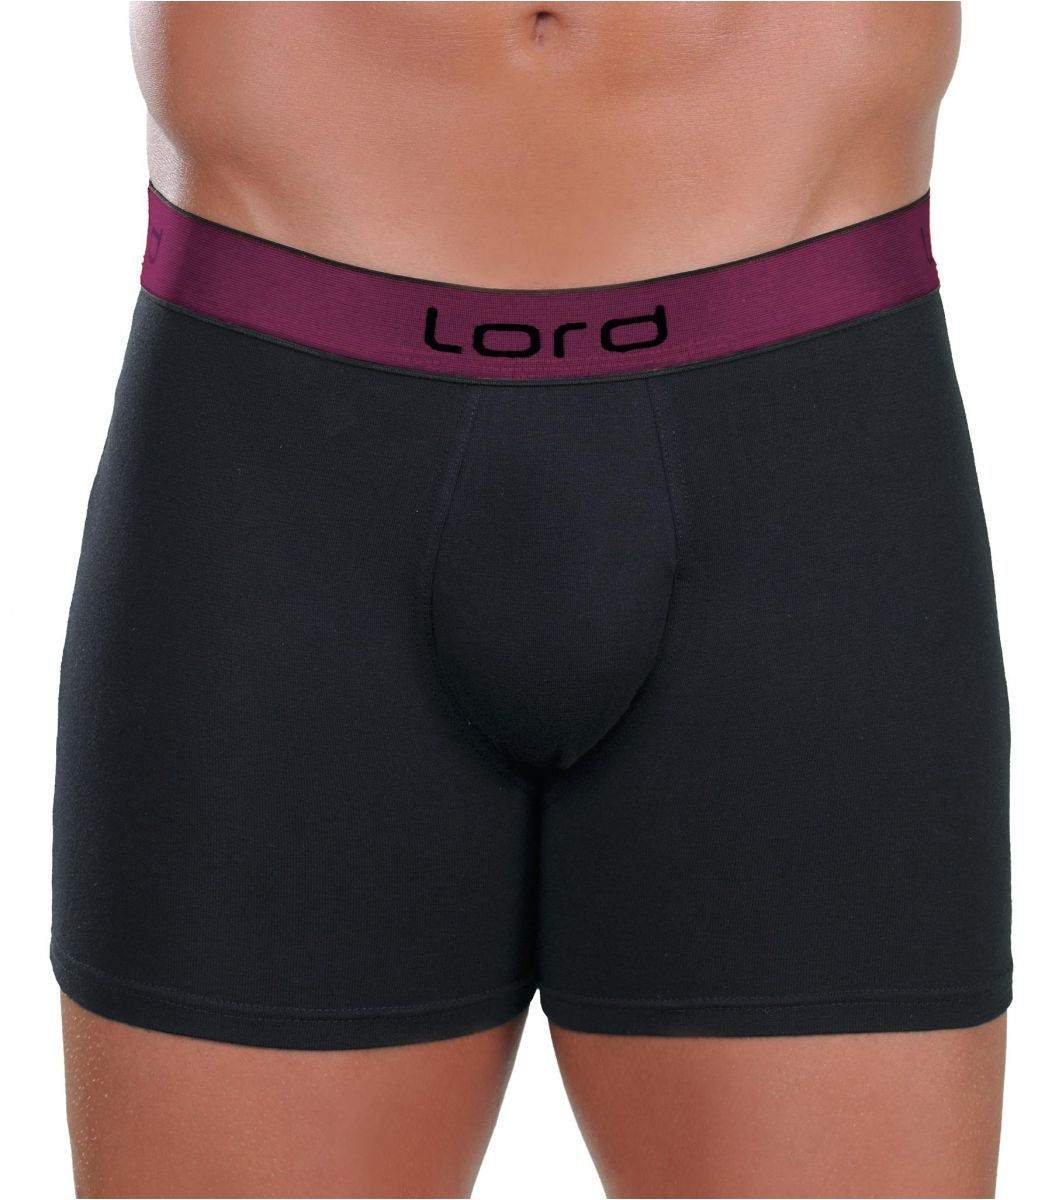  Boxers Lord Lord Boxer Athletic 8192-7